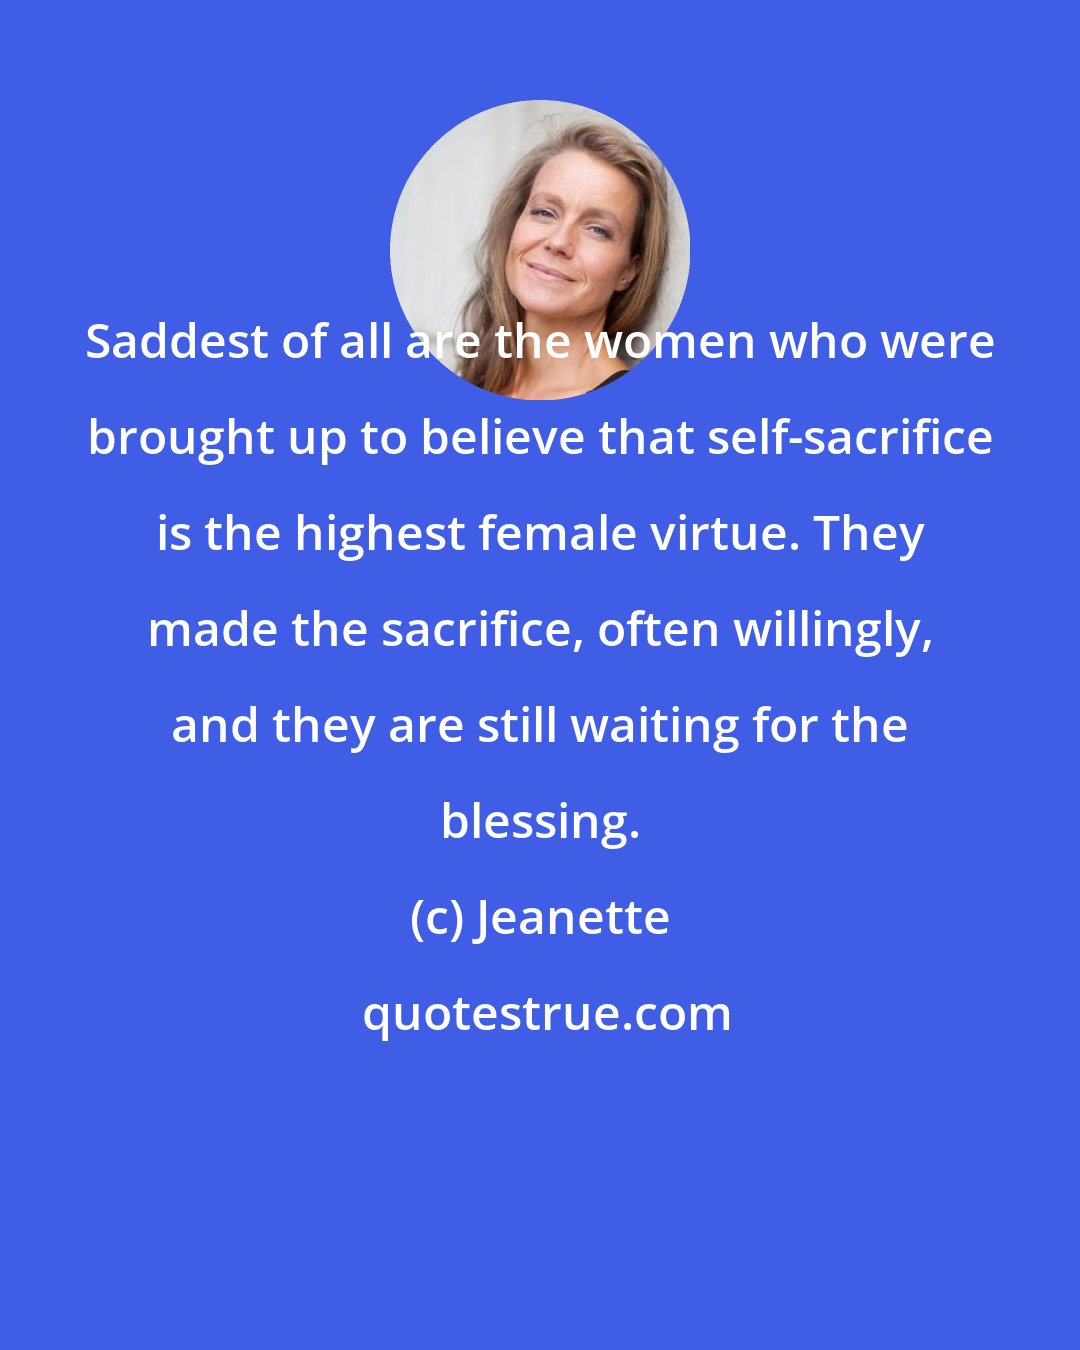 Jeanette: Saddest of all are the women who were brought up to believe that self-sacrifice is the highest female virtue. They made the sacrifice, often willingly, and they are still waiting for the blessing.